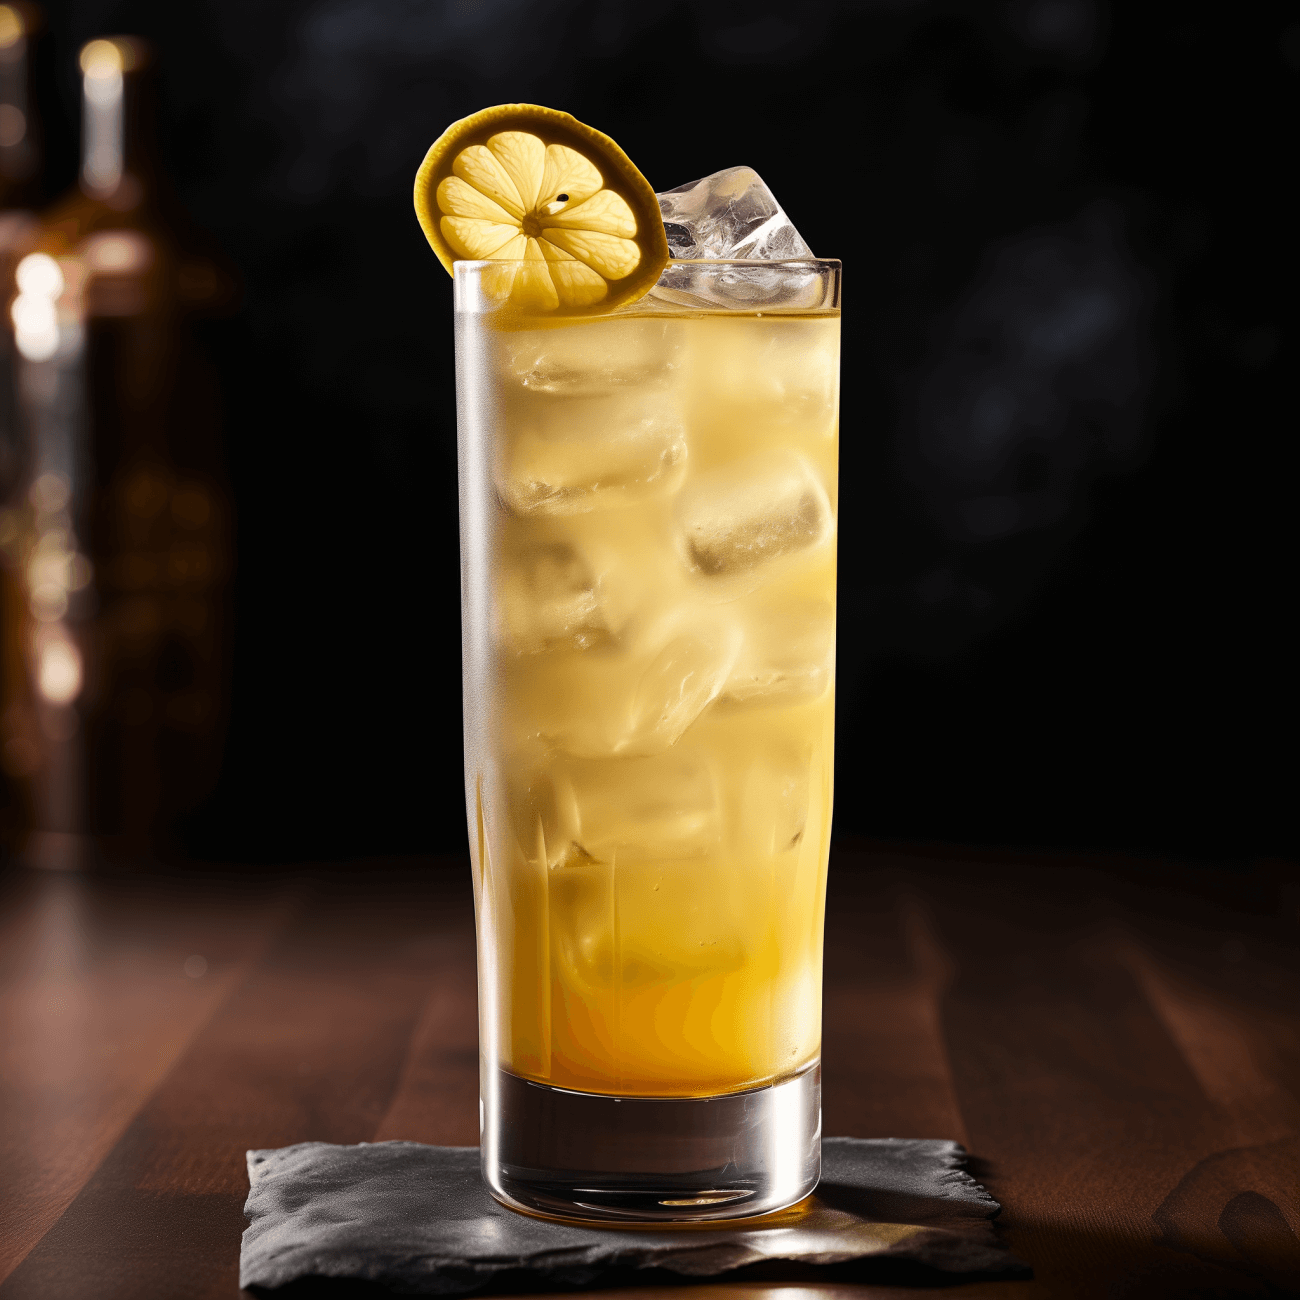 Skeleton Key Cocktail Recipe - The Skeleton Key is a harmonious blend of sweet, sour, and spicy flavors. The bourbon provides a robust base, while the elderflower liqueur adds a subtle sweetness. The lemon juice gives it a tangy kick, and the ginger beer adds a spicy fizz. The bitters round out the flavor profile, adding depth and complexity.